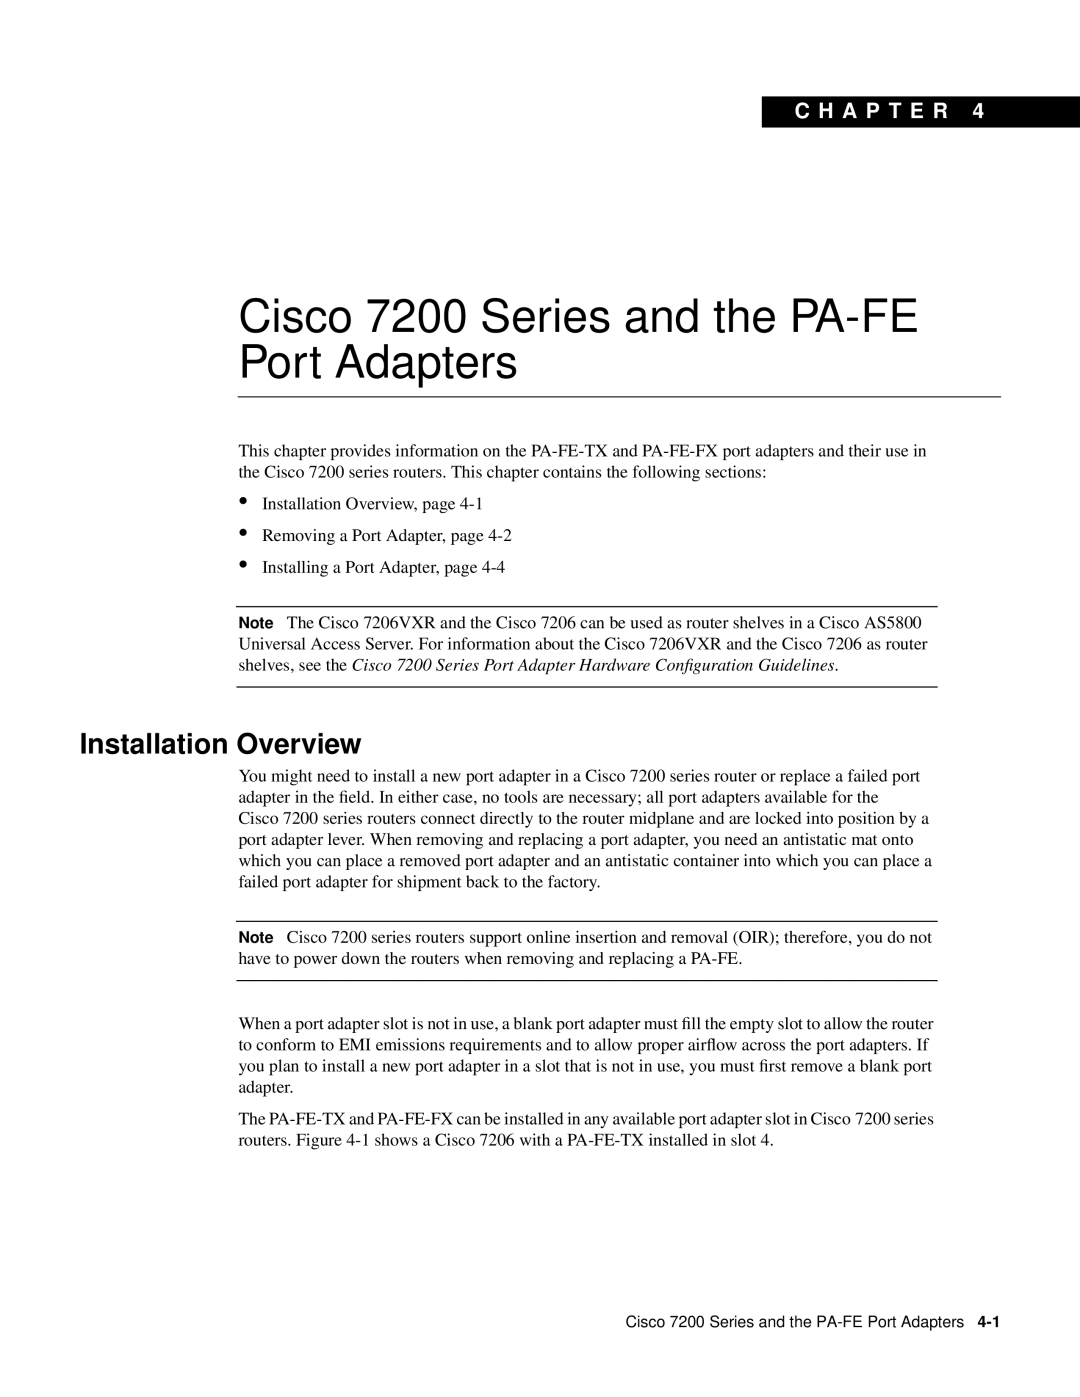 Cisco Systems PA-FE-FX, PA-FE-TX manual Cisco 7200 Series and the PA-FE Port Adapters, Installation Overview, C H A P T E R 